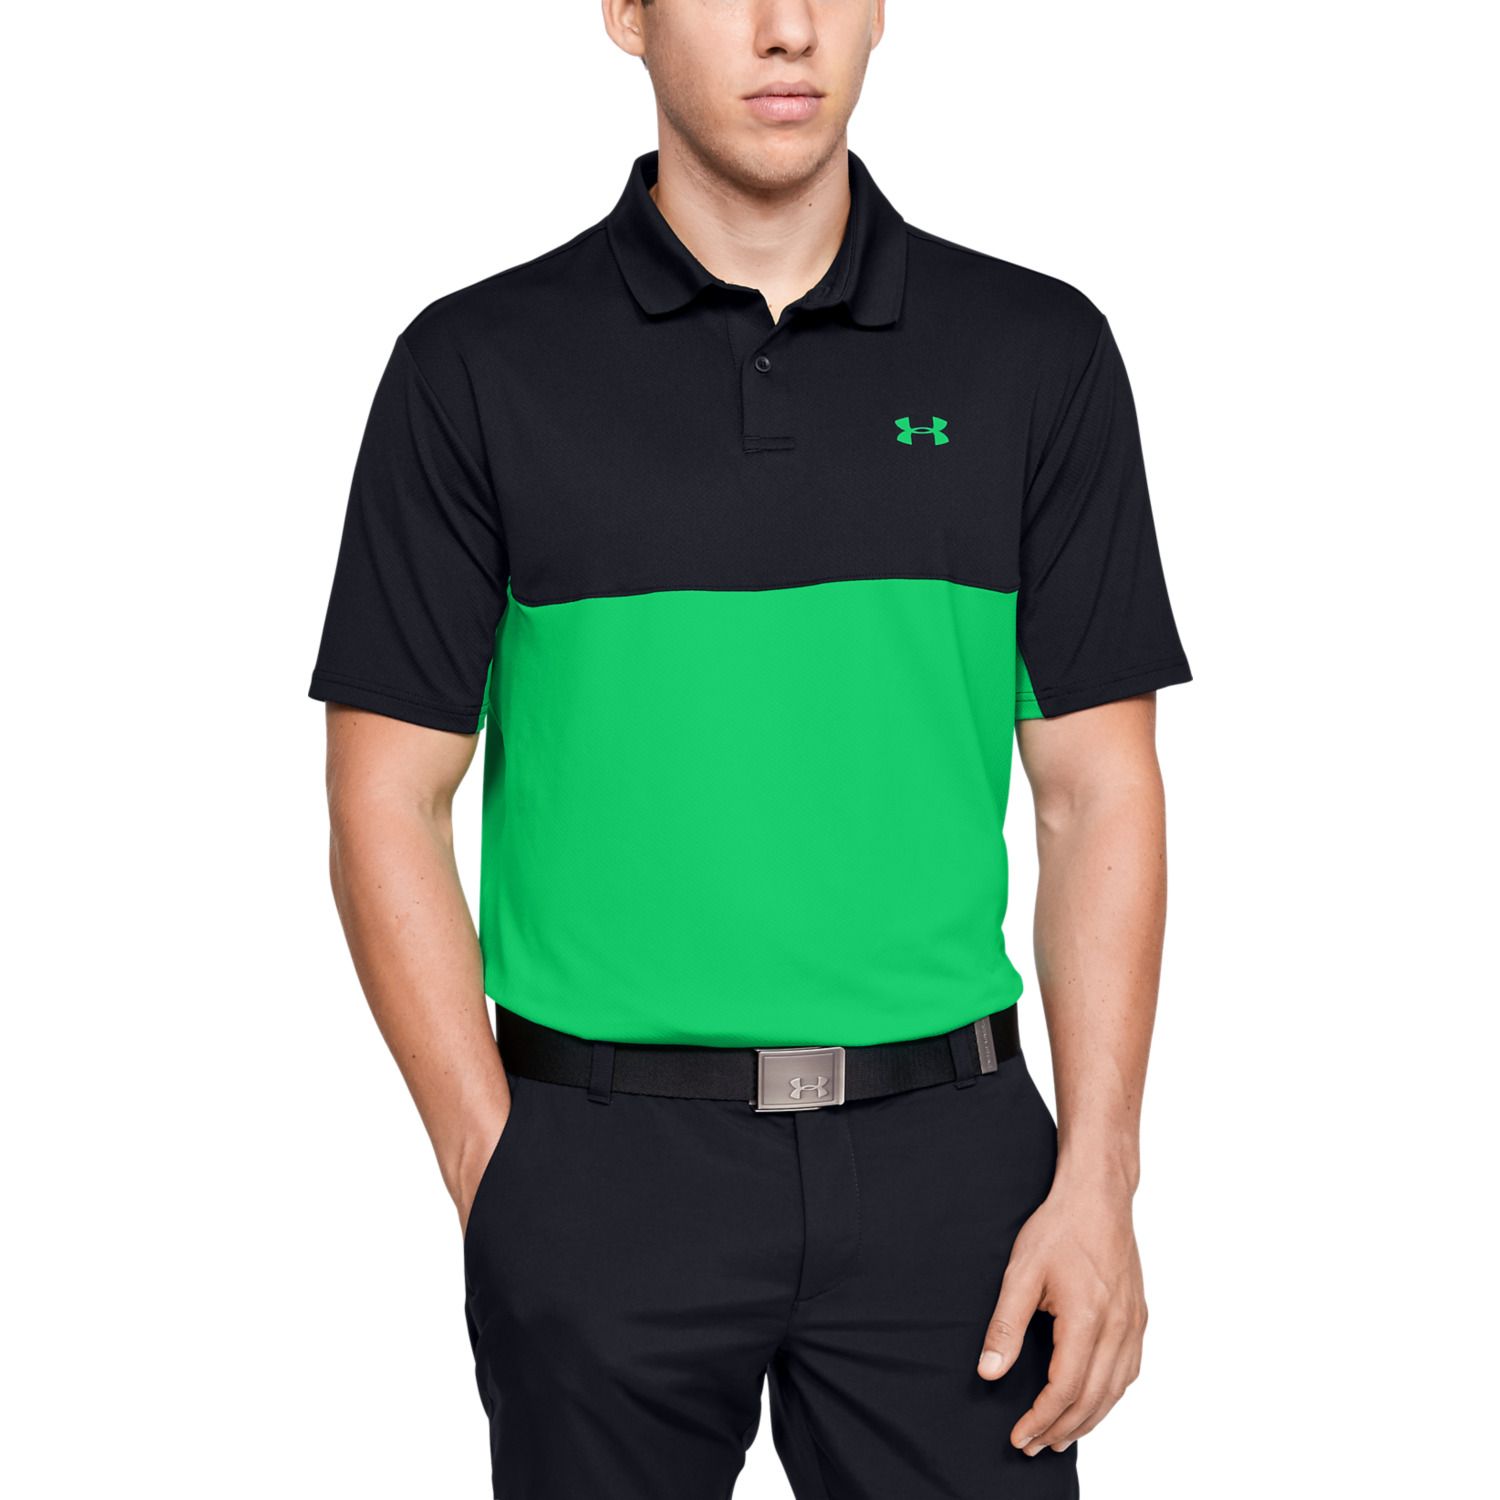 kohl's under armour golf shirts